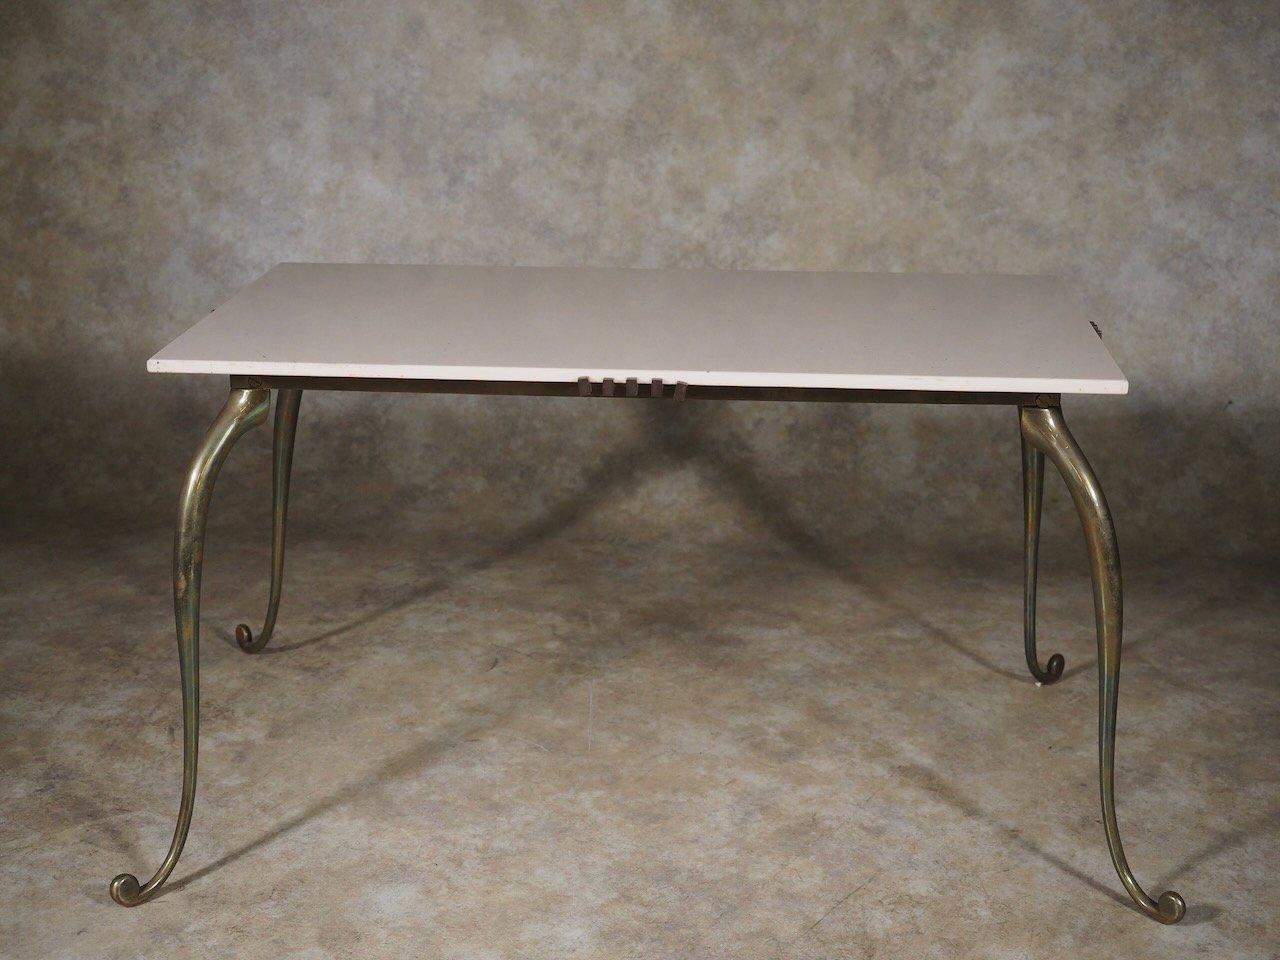 French Forties Art Deco low table by Rene Prou in bronze with original white glass top. Measures: 32” wide x 18” deep x 18” high.

René Prou

(1889-1948)

A decorator as well as furniture designer, Rene Prou was born in Nantes and educated in